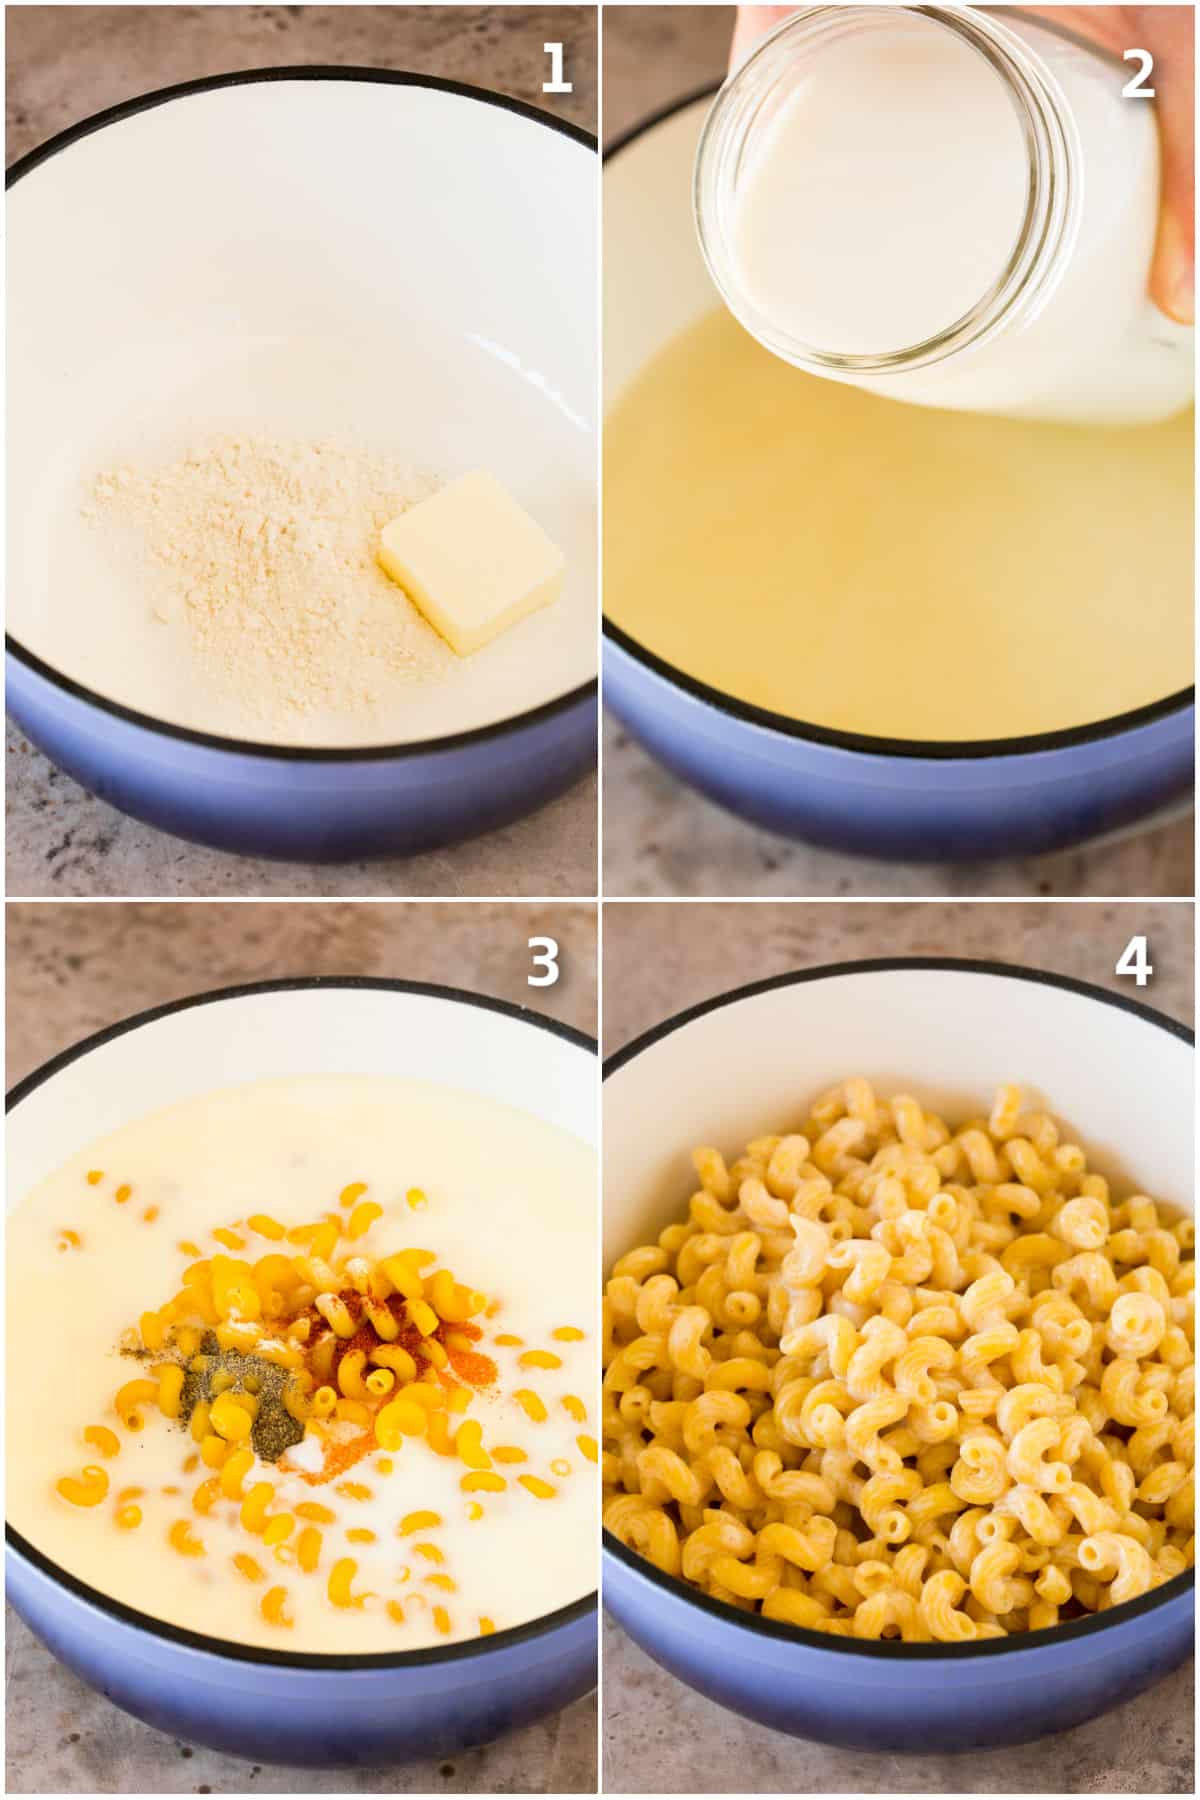 Process shots showing pasta cooking in a milk sauce.